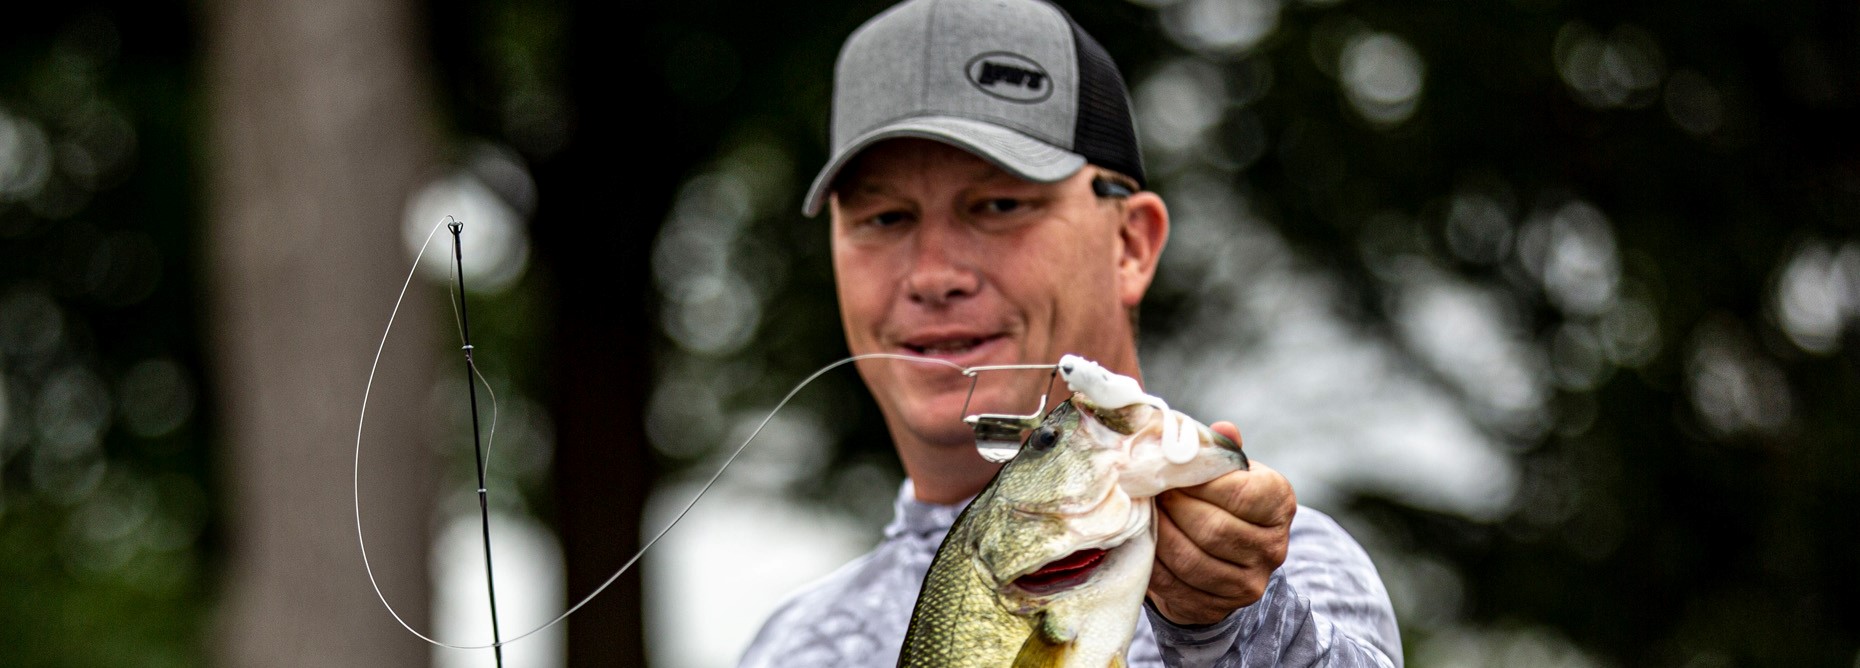 Best Buzzbaits For Bass - Best Bass Fishing Lures